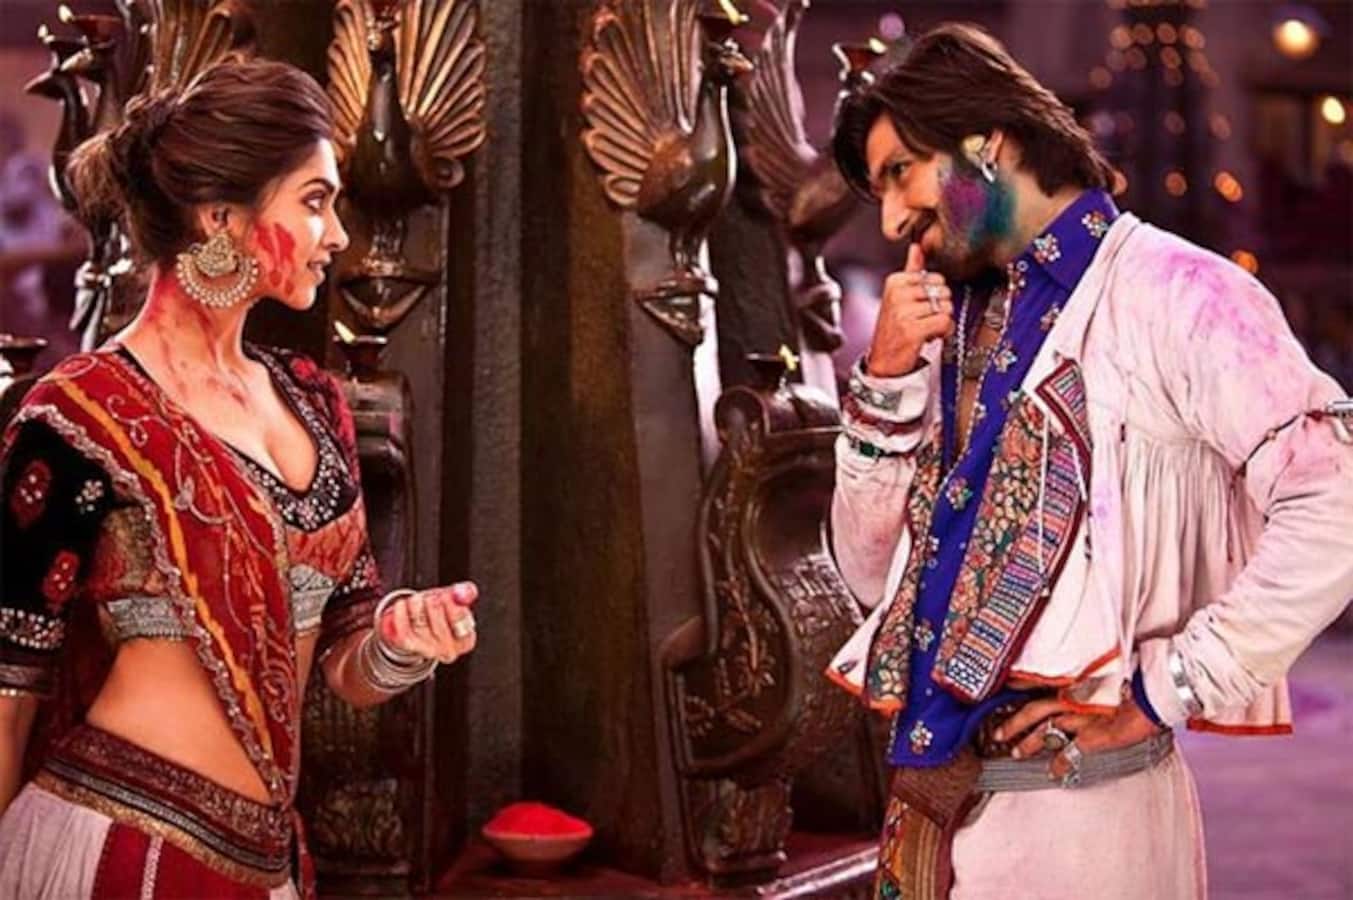 Ram-Leela embroiled in legal trouble in Ahmedabad!